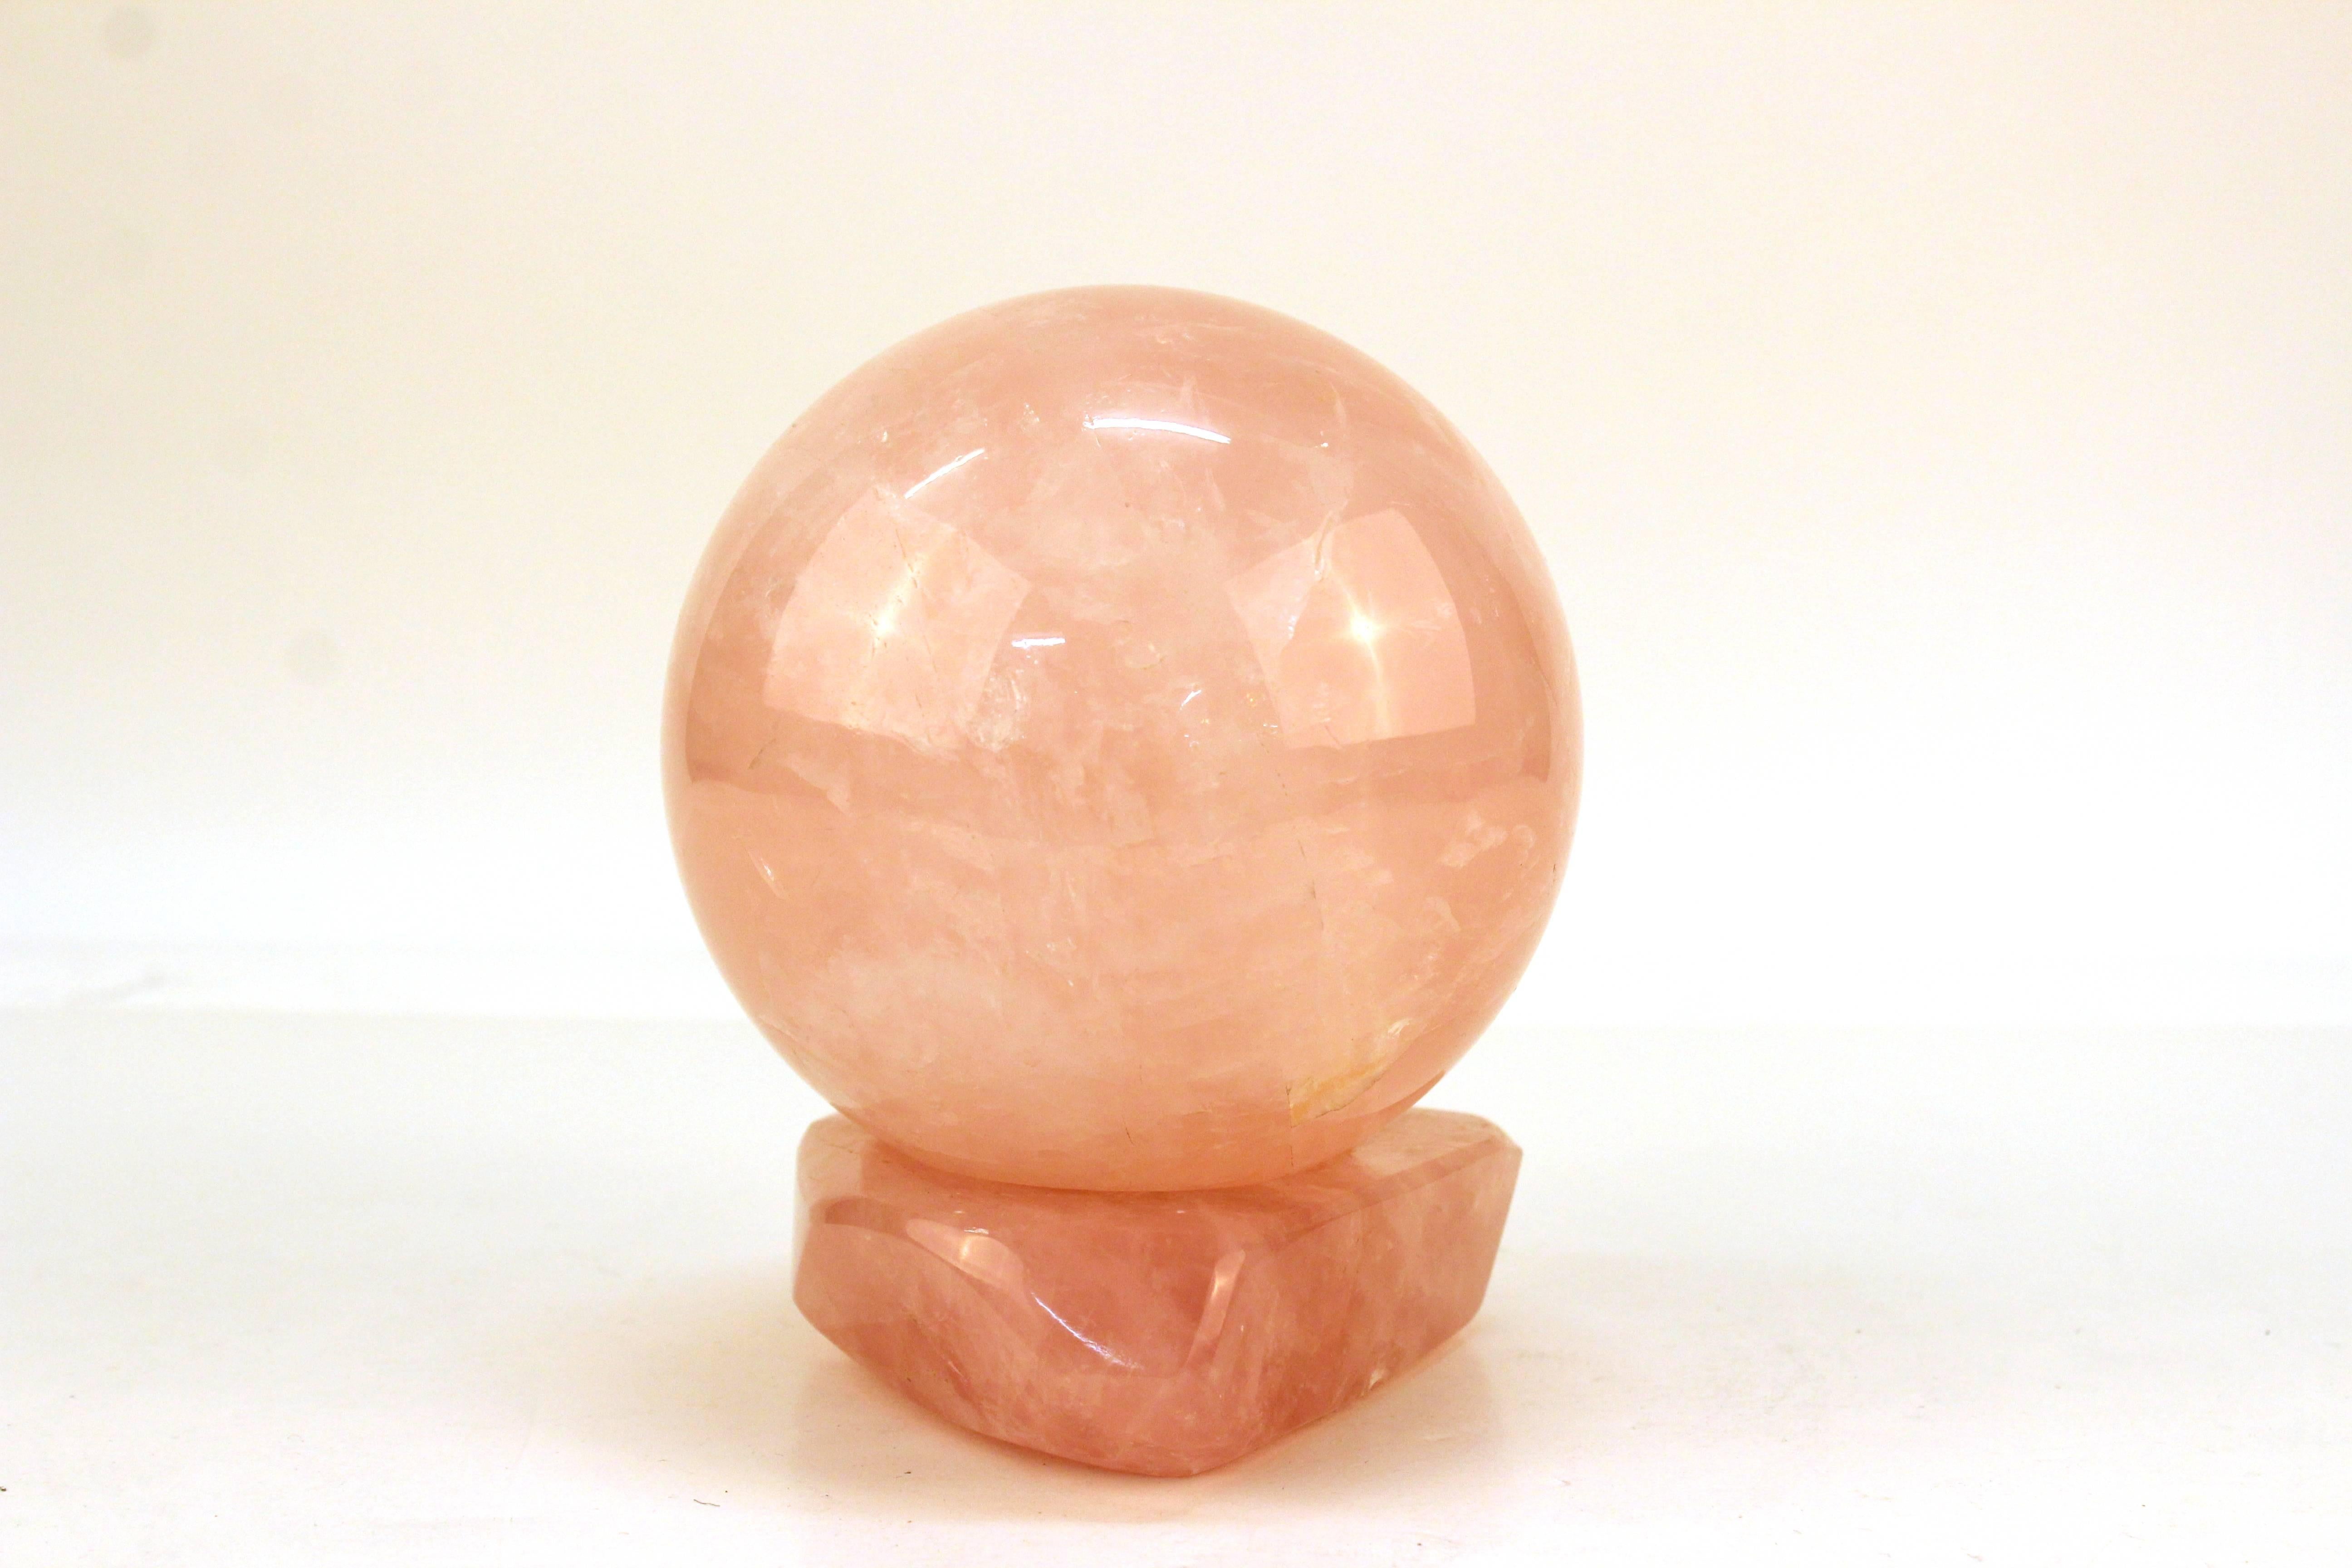 A decorative sphere and stand in matching rose quartz. Both pieces are a deep pink color with highly polished surface. In very good condition.